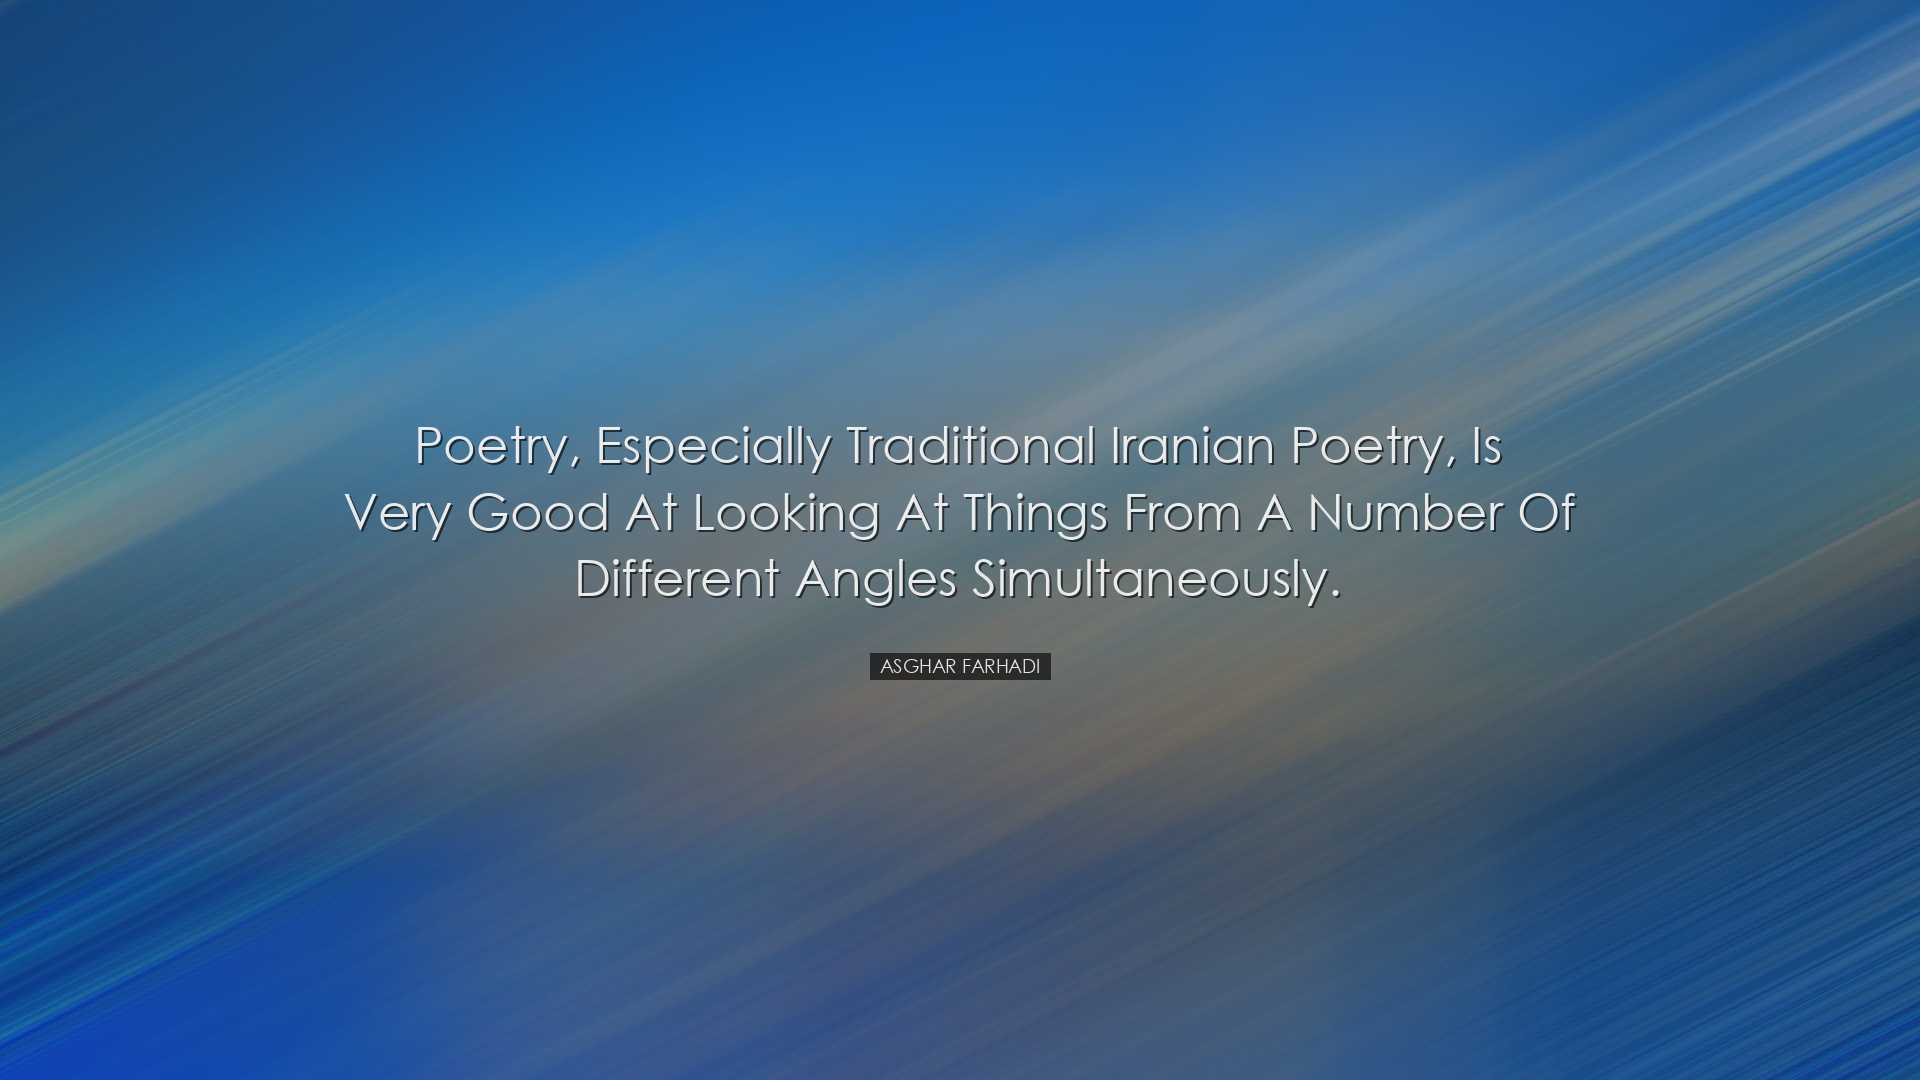 Poetry, especially traditional Iranian poetry, is very good at loo